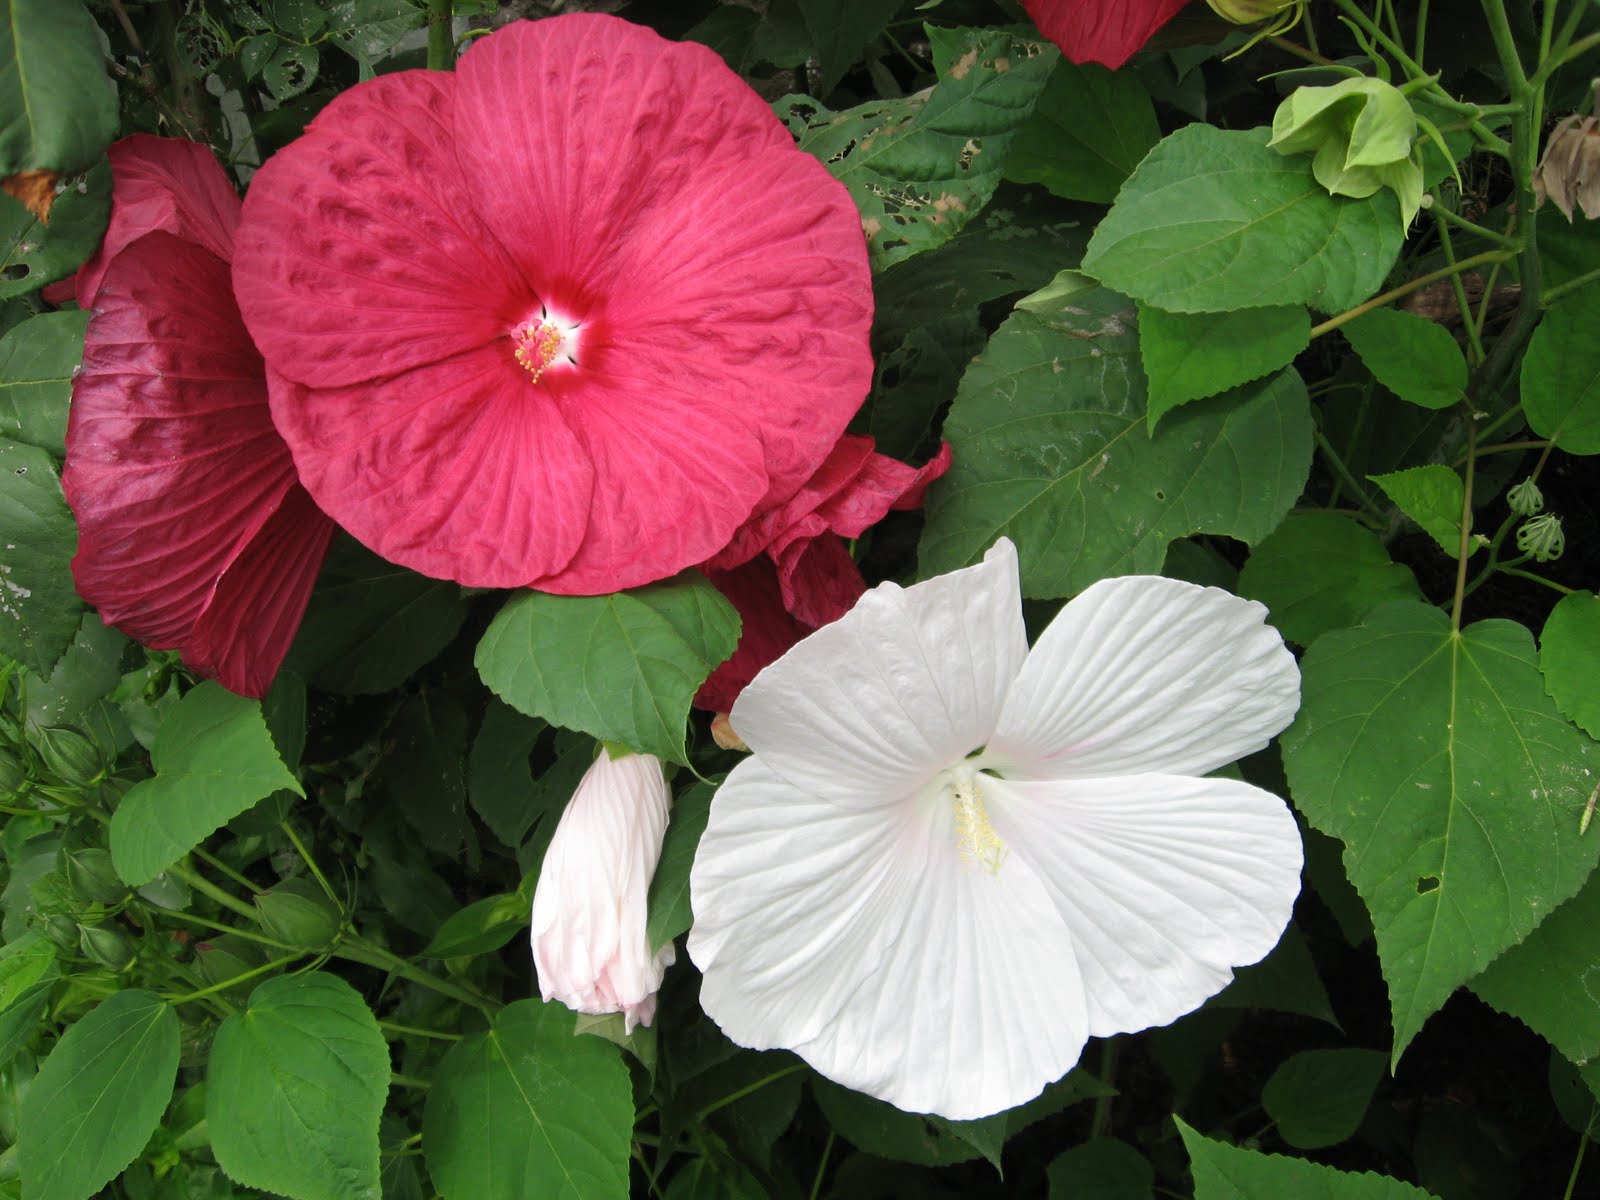 It produces flowers in different attractive and vibrant colors like white, red and pink. Growing conditions include full sun and fertile and moist soil.